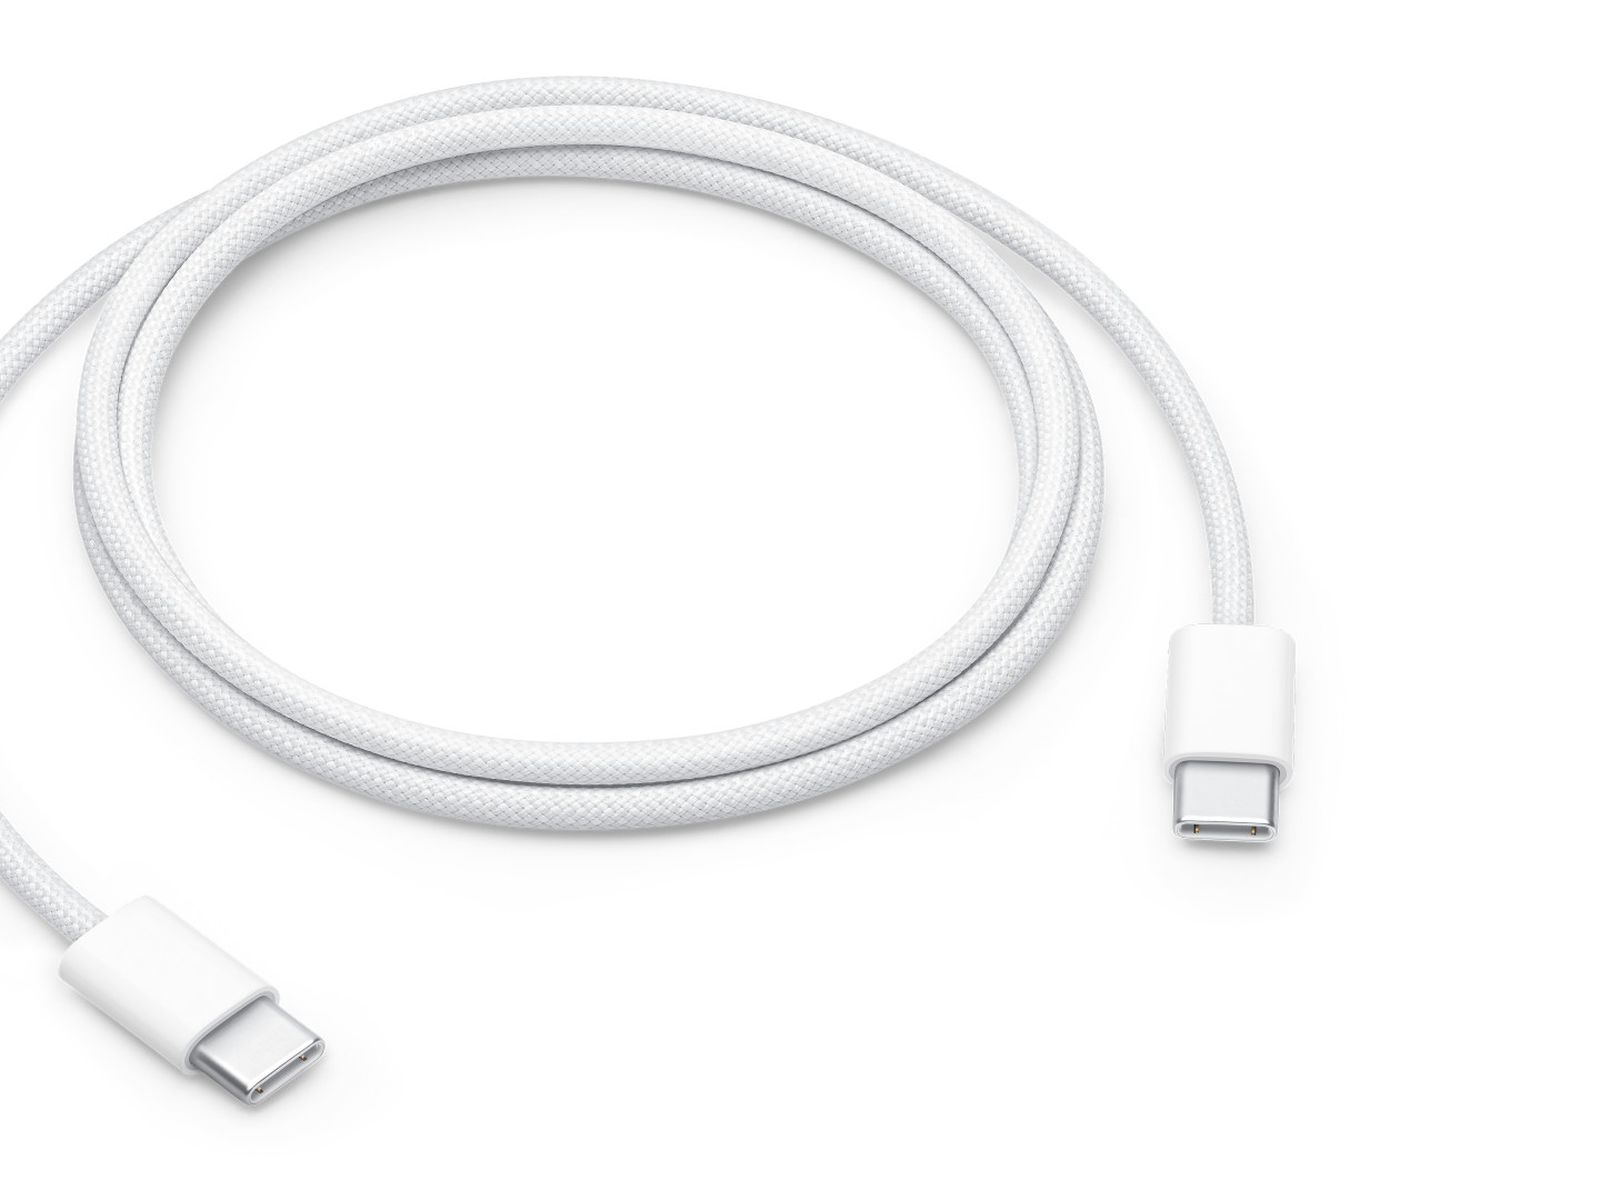 Apple Selling New 60W and 240W USB-C Woven Charge Cables - MacRumors